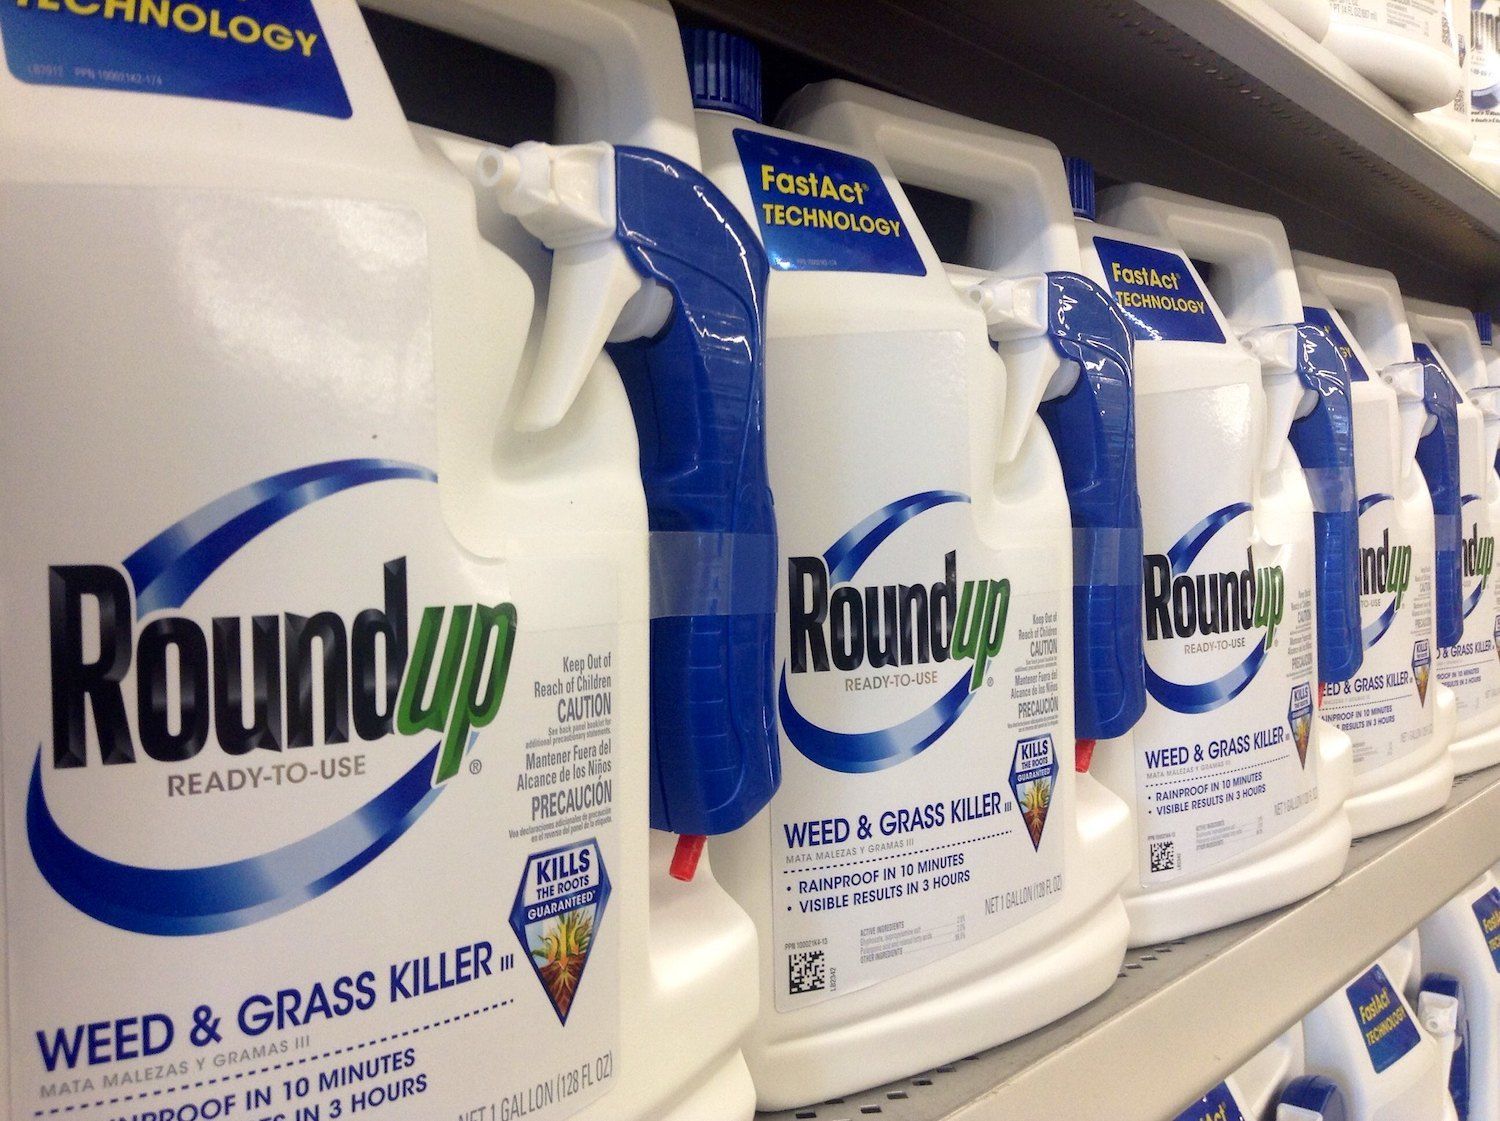 How Roundup Works